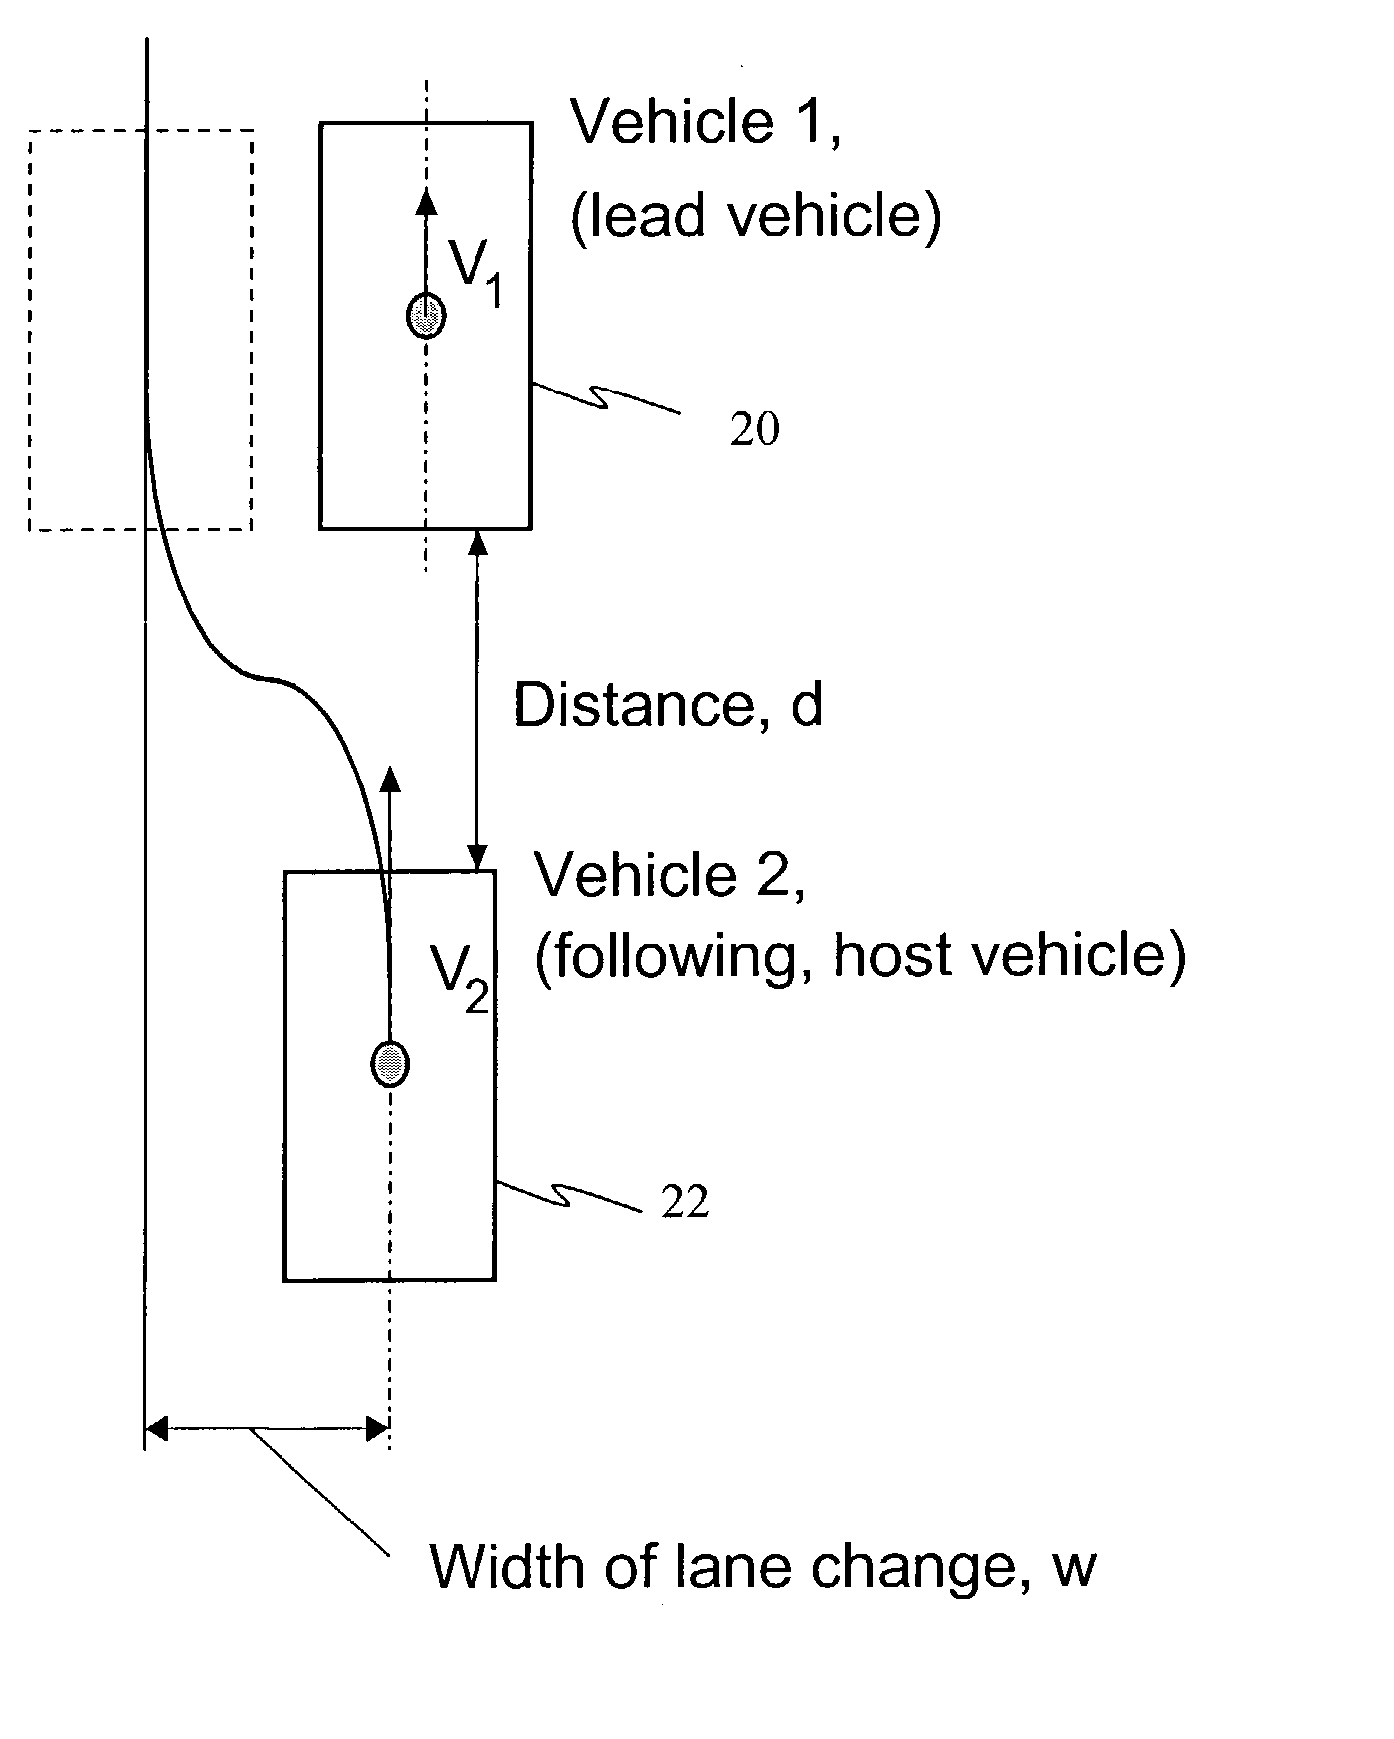 Collision avoidance with active steering and braking